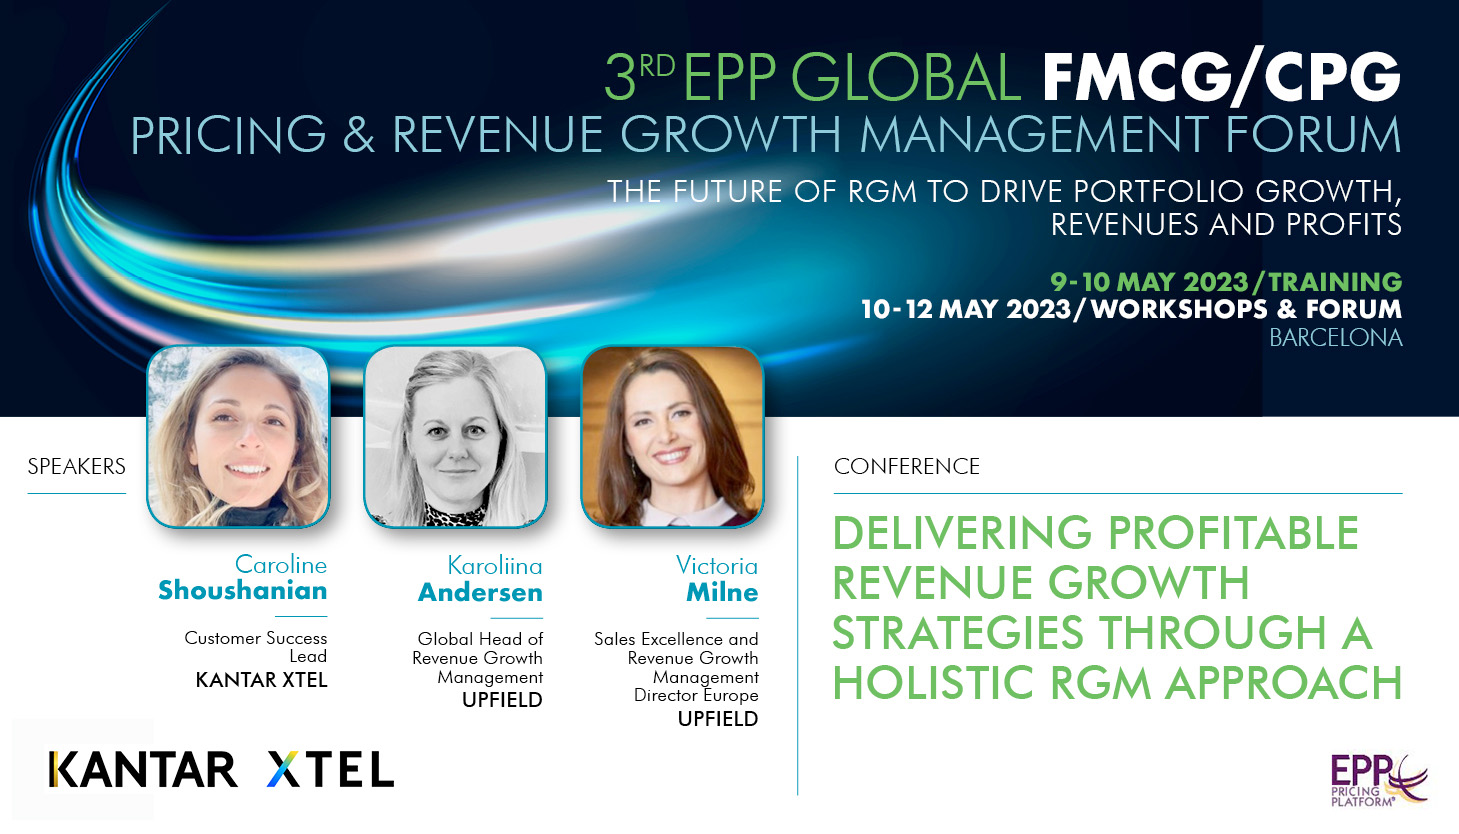 3rd EPP Global FMCG/CPG Pricing and revenue growth management forum